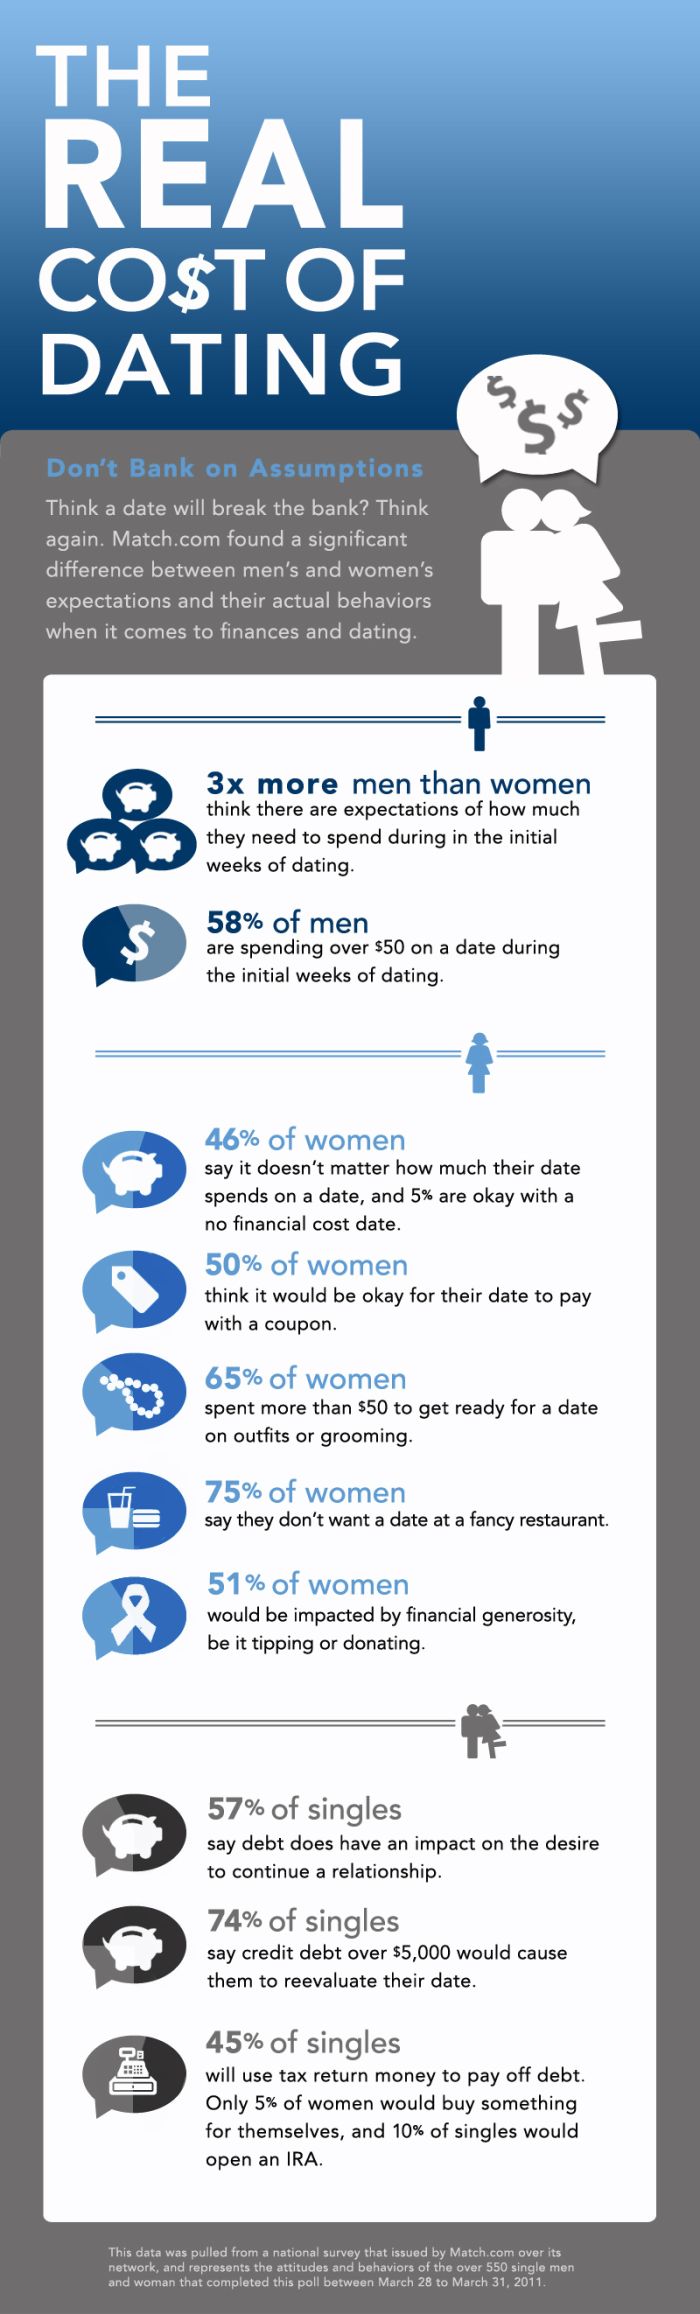 The Real Cost of Dating (infographic)